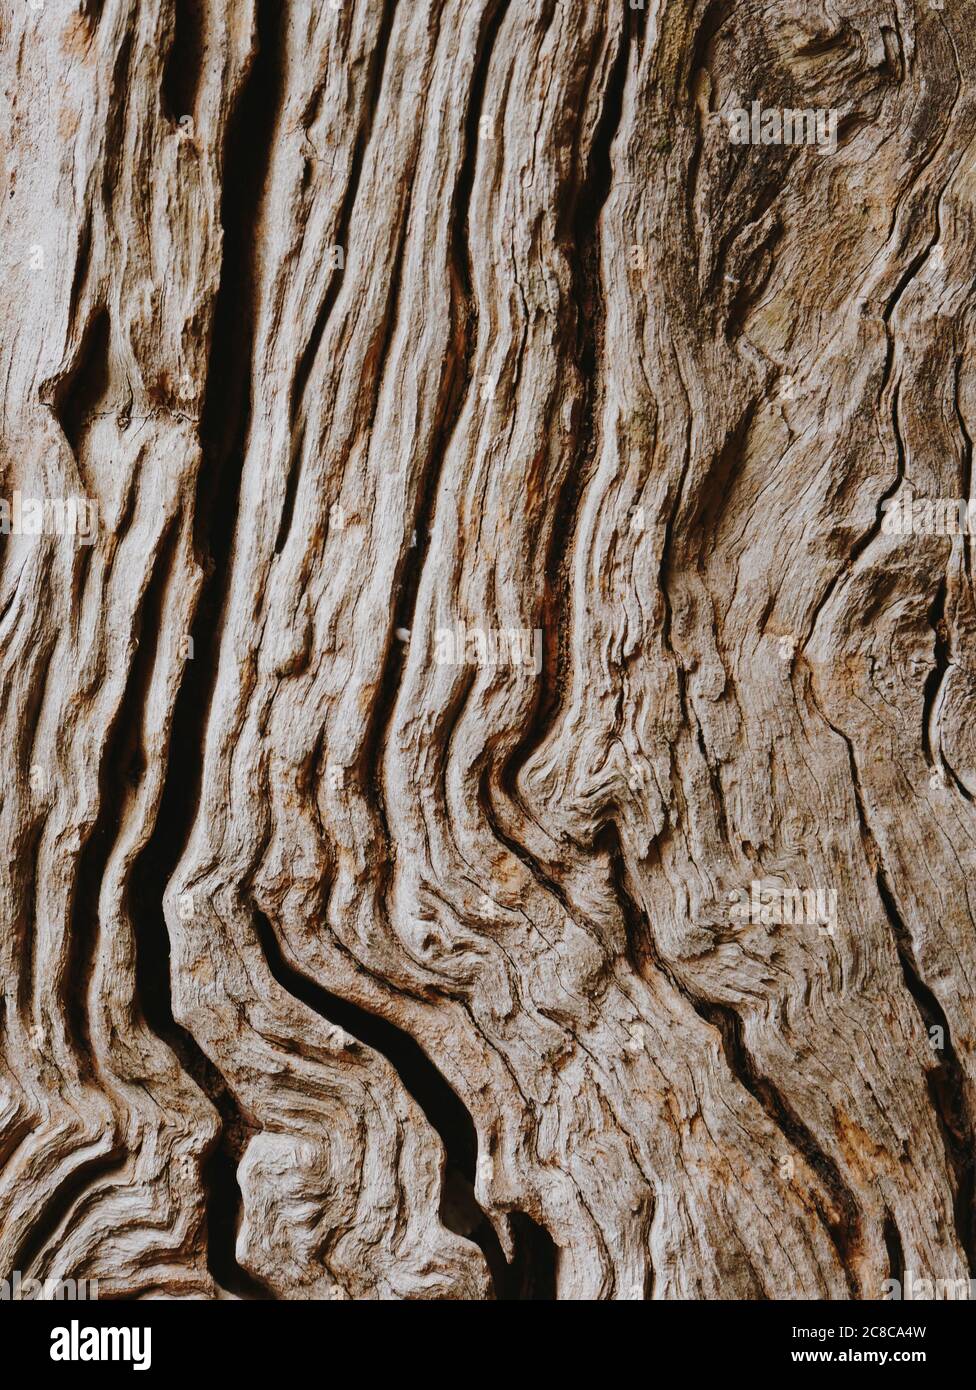 Closeup of a bark of olive trees an abstract effect of texture Stock Photo